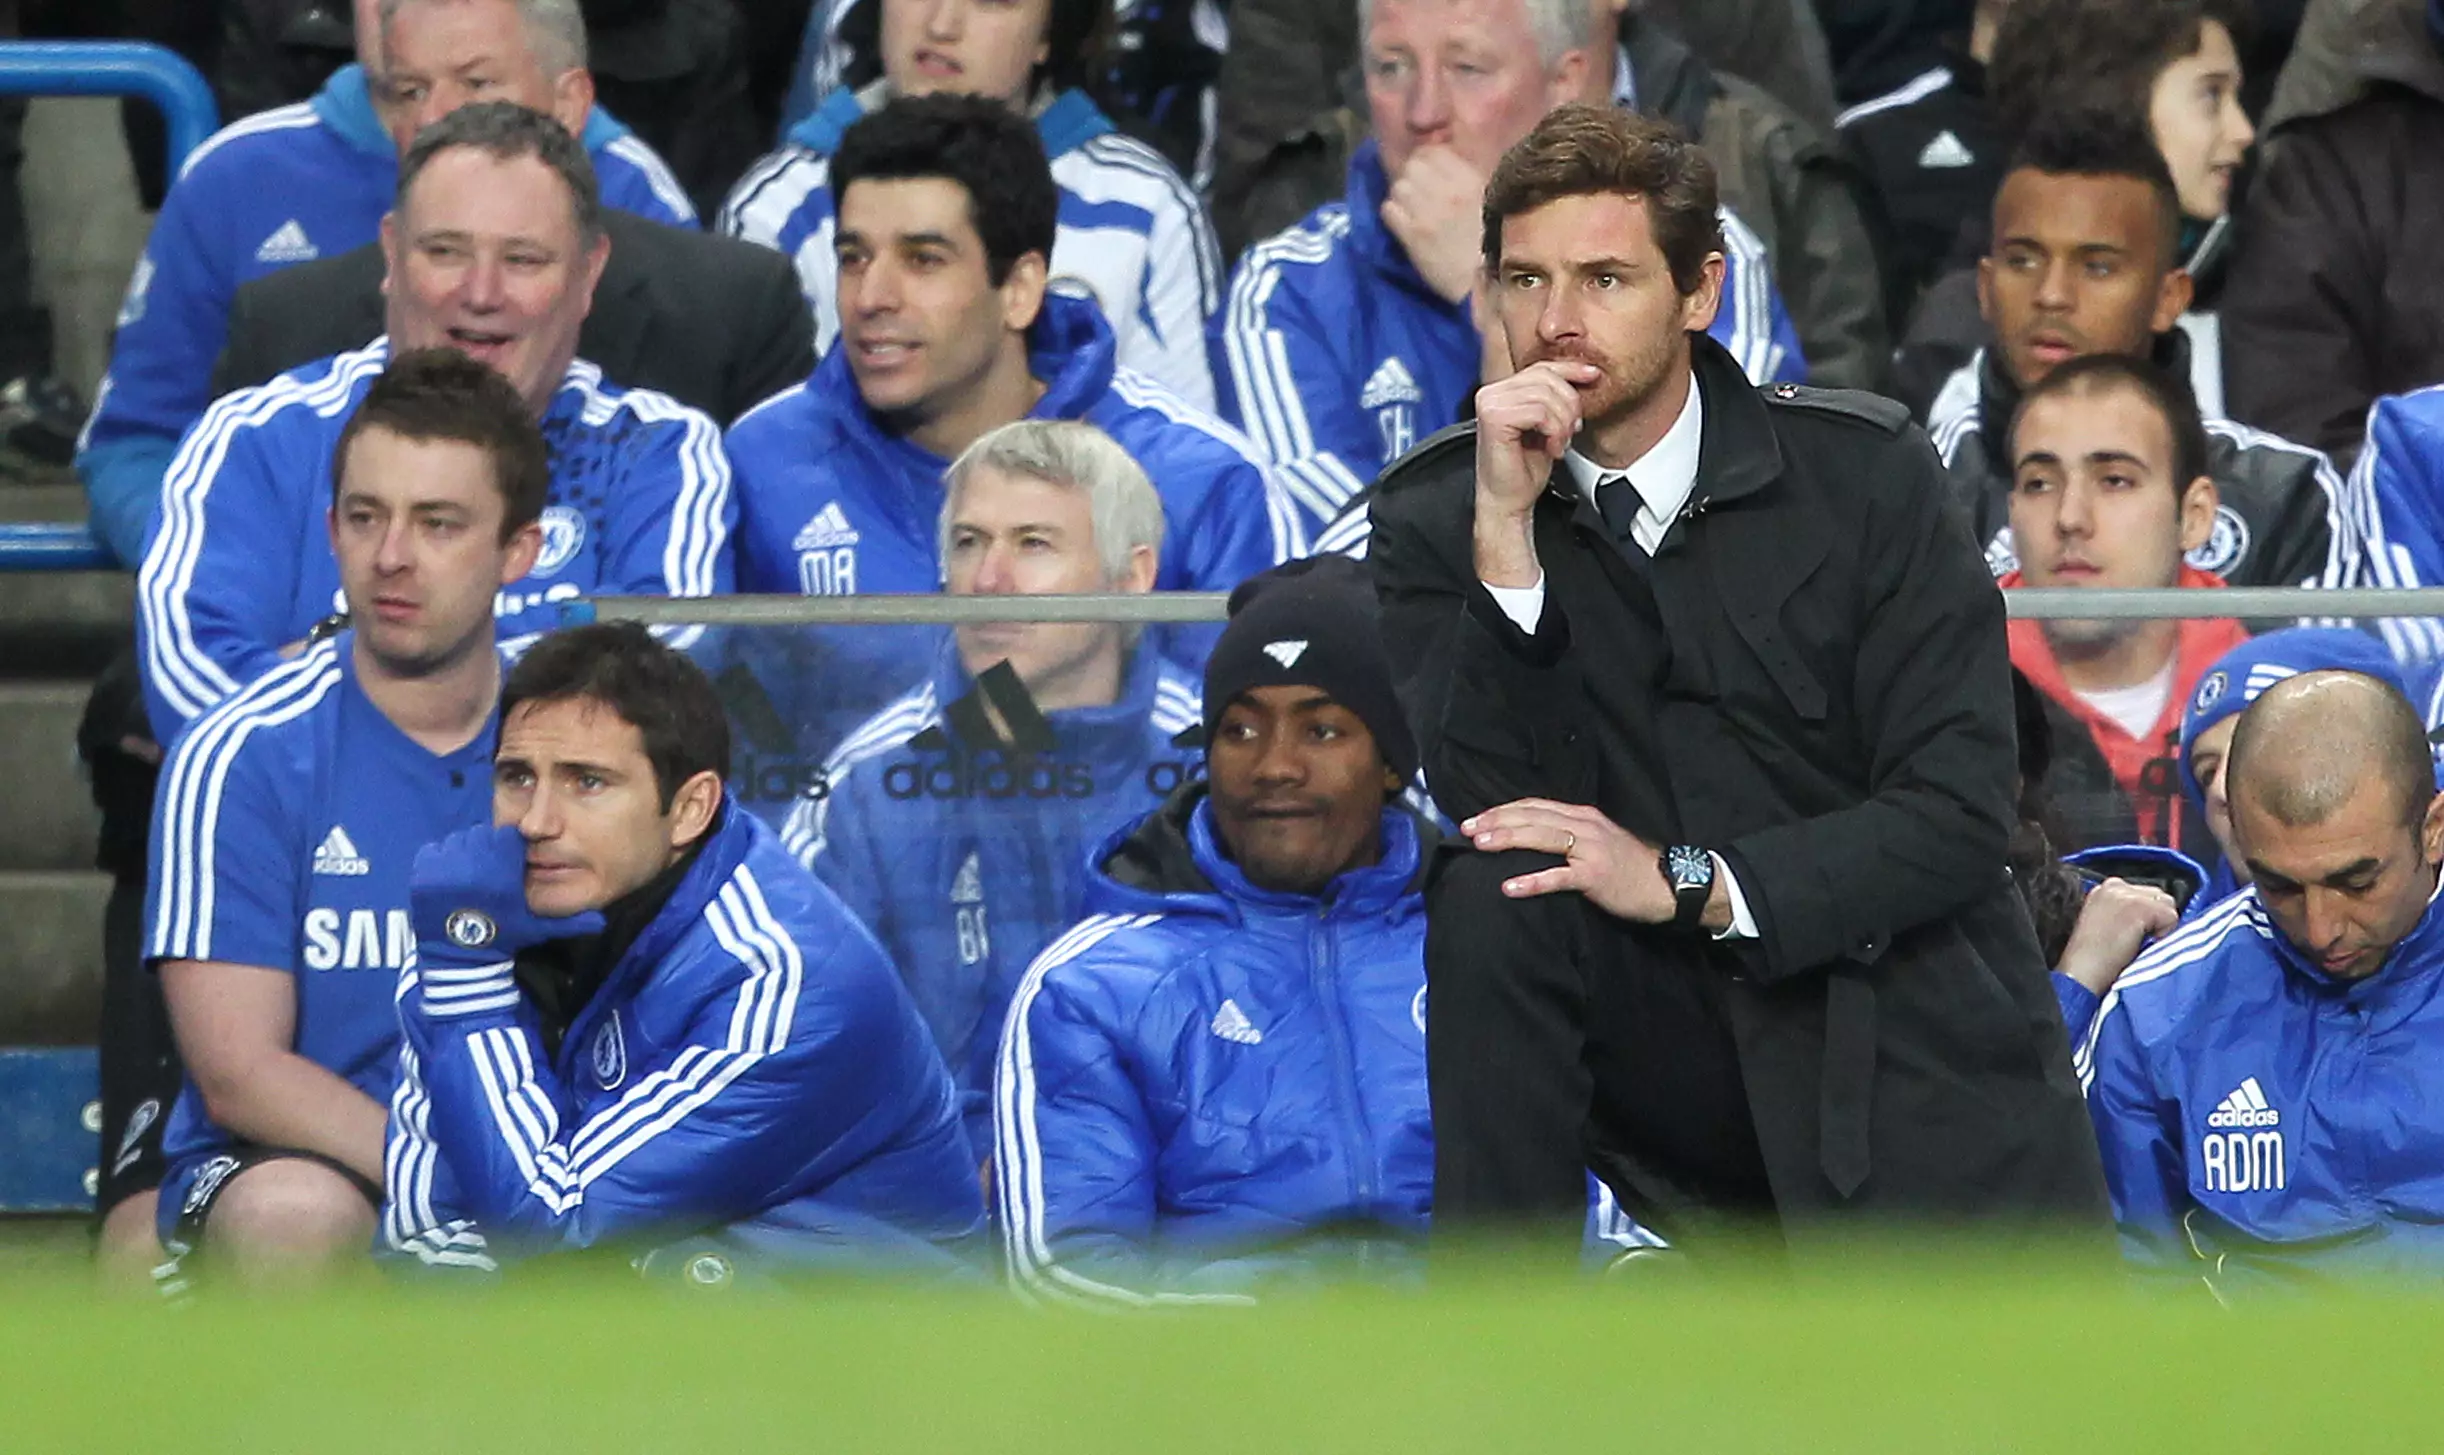 AVB became infamous for his crouching at Stamford Bridge. Image: PA Images